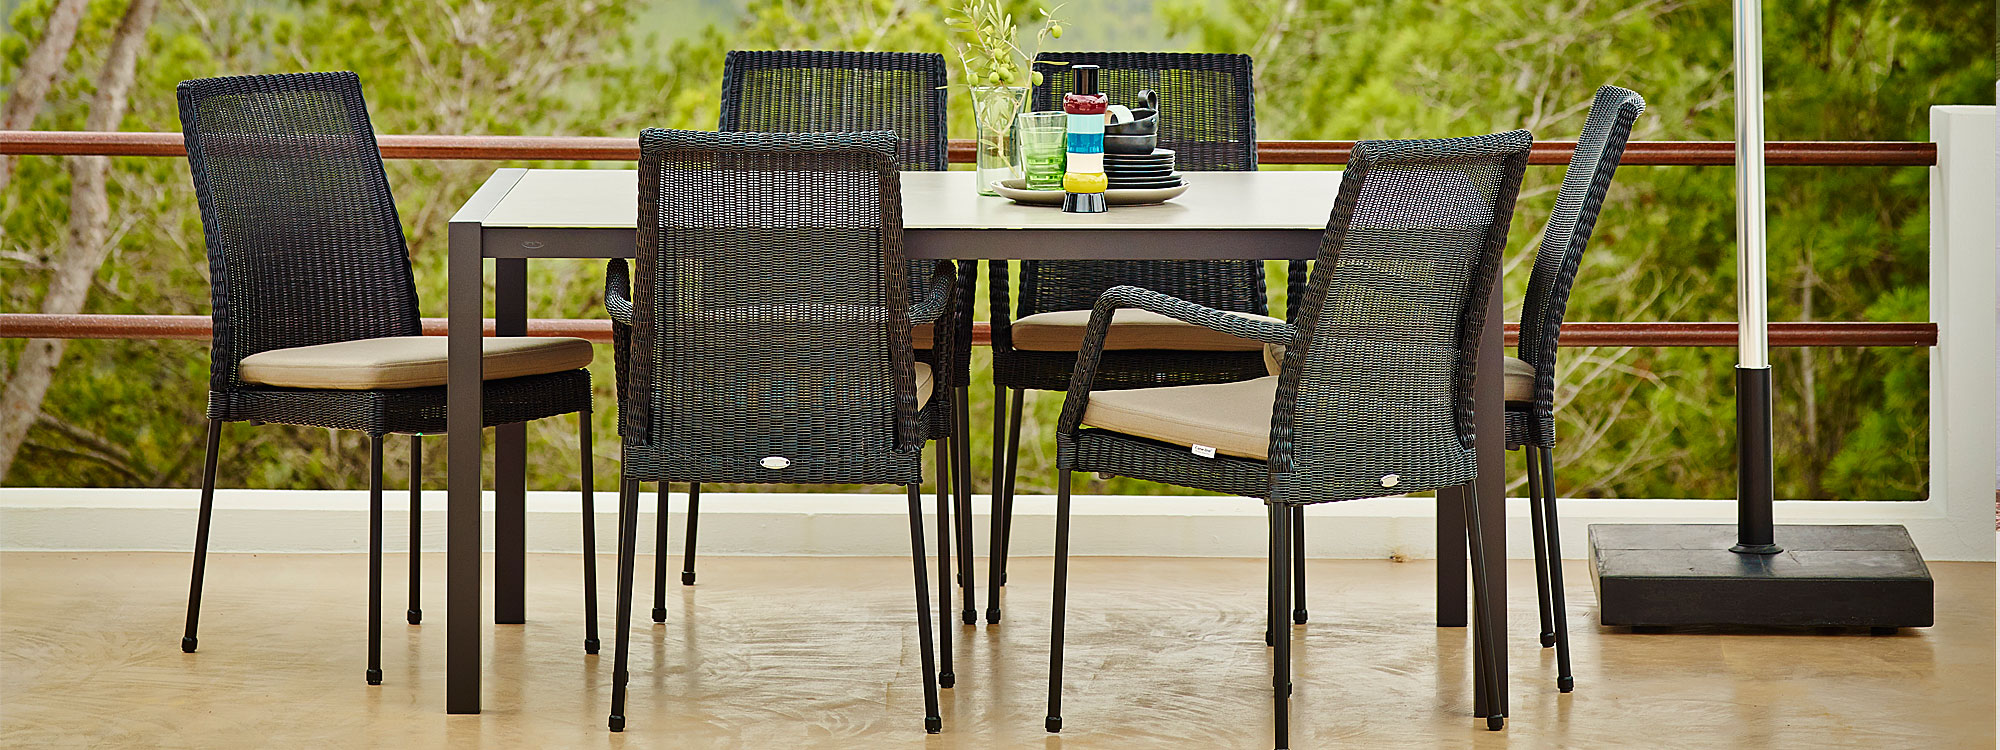 Image of black Newport stacking garden chairs around Cane-line table